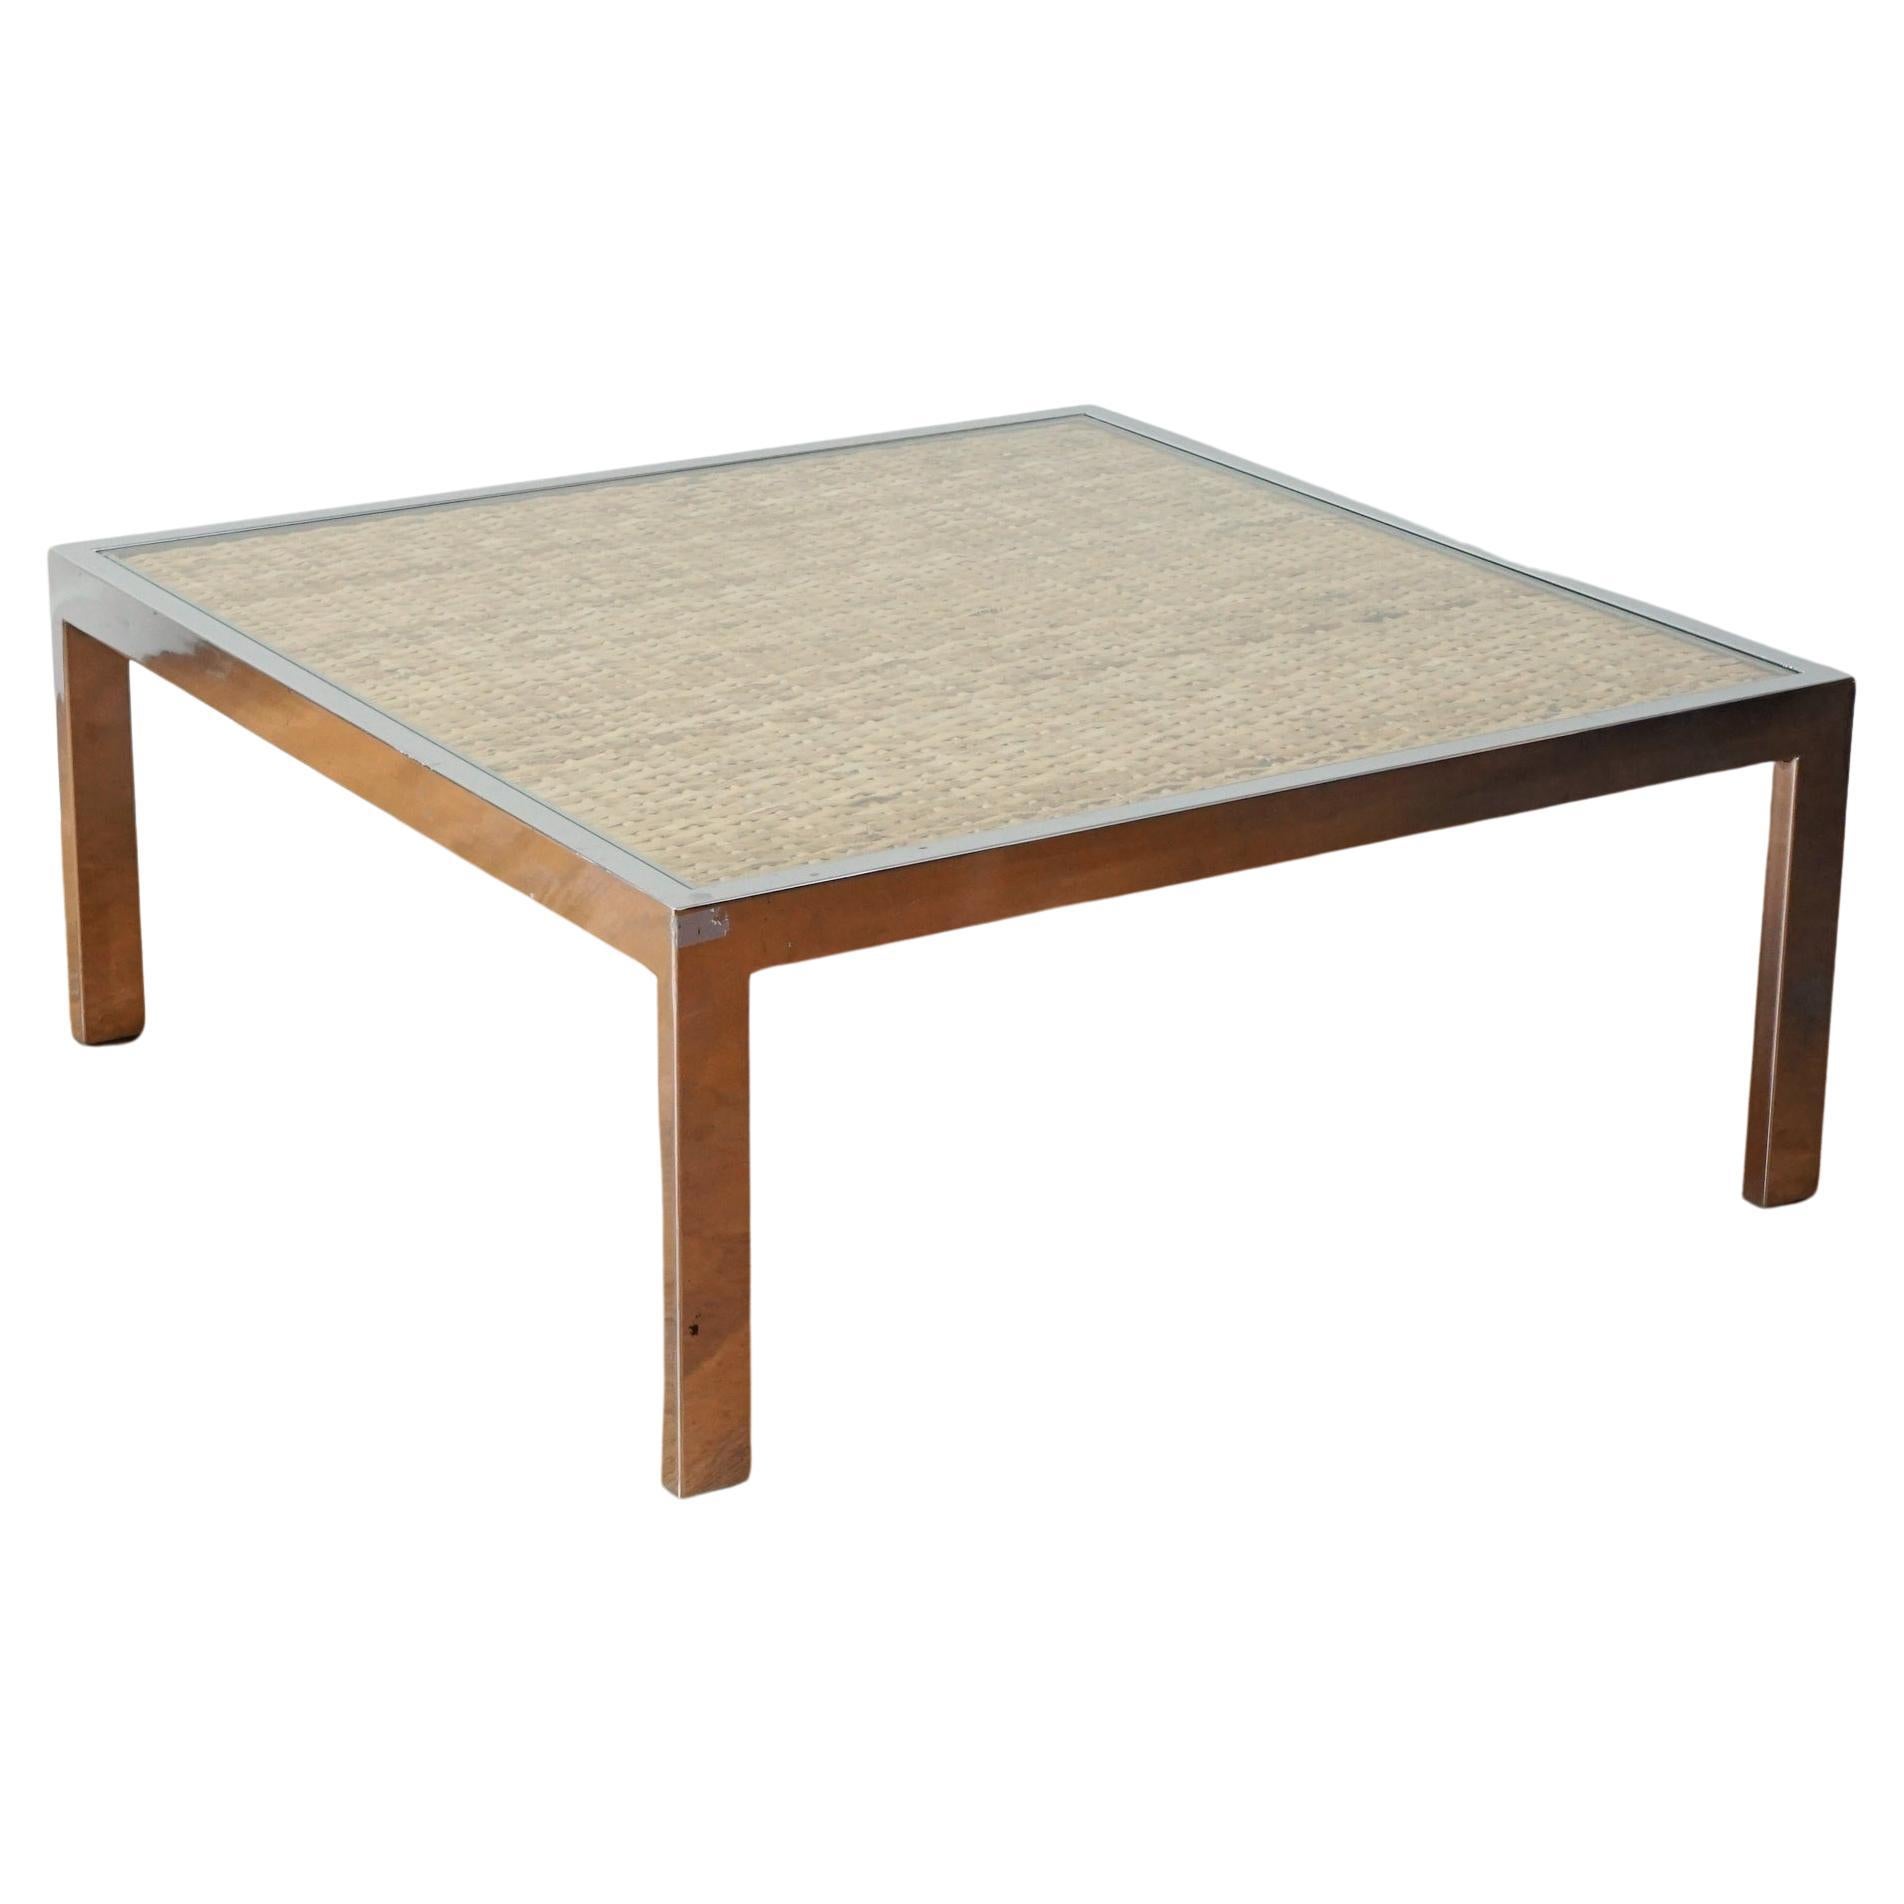 Square Chrome and Wicker Coffee Table For Sale